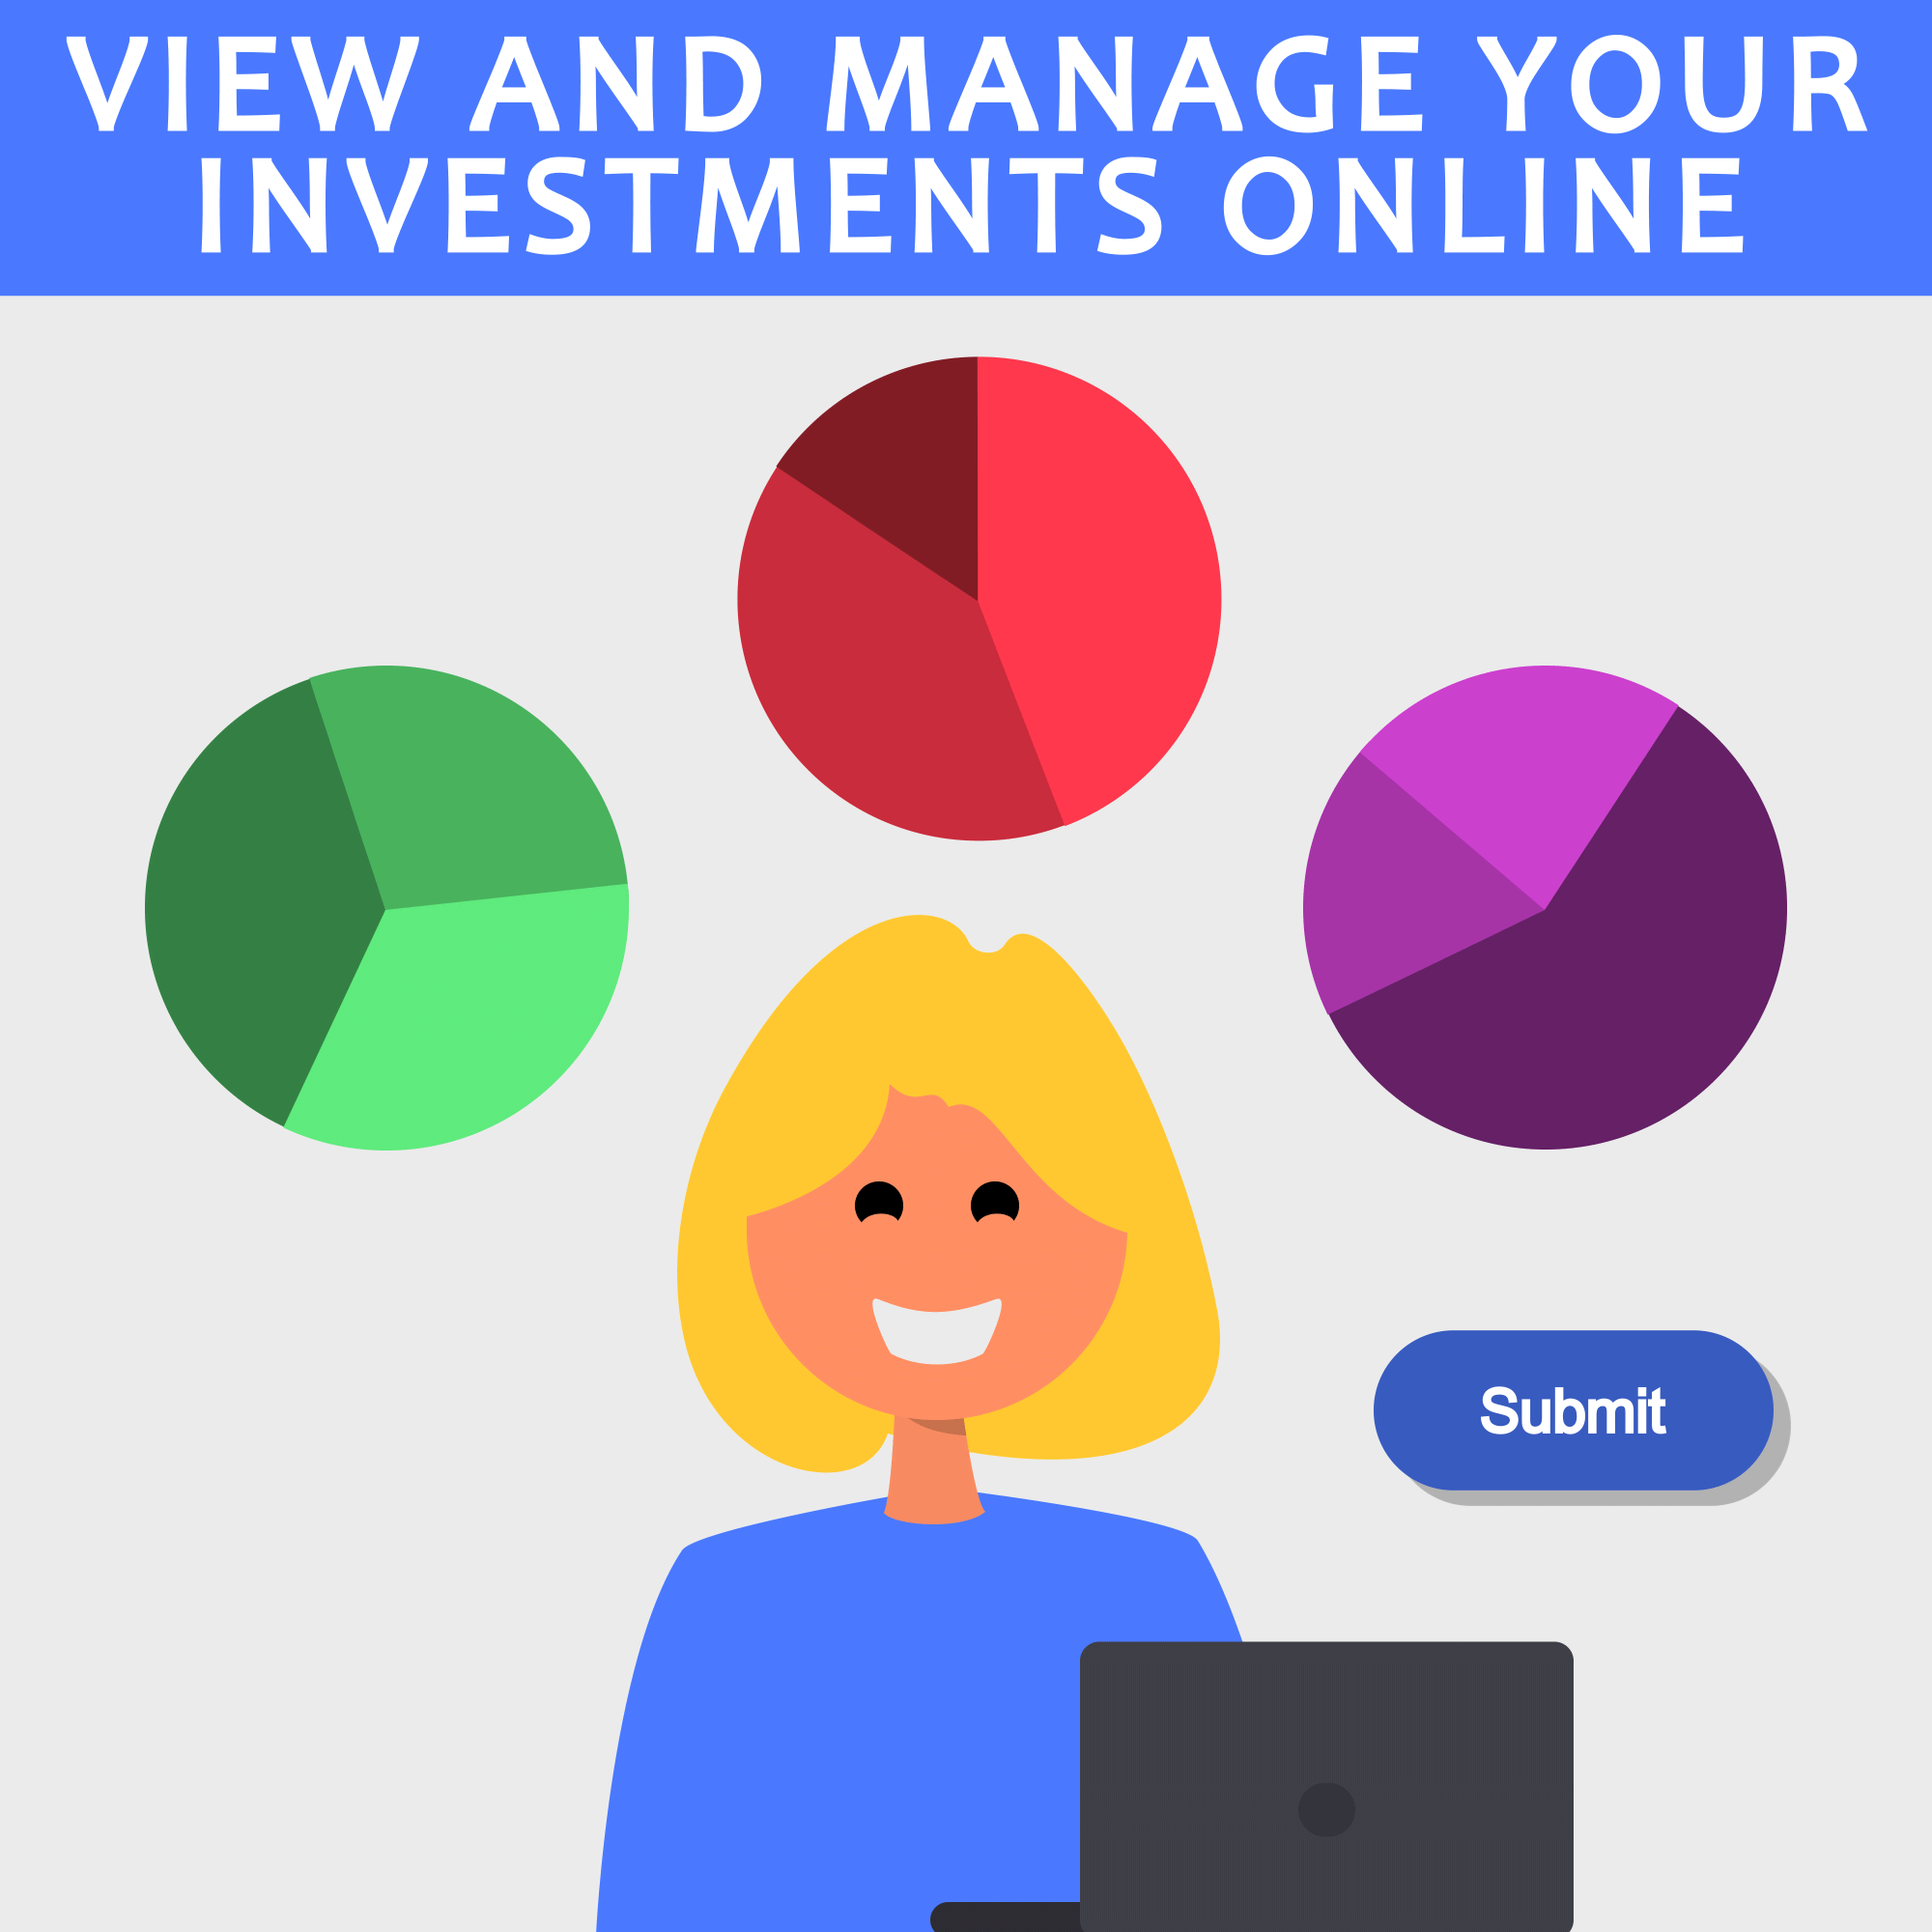 How to View and Manage Investments Online